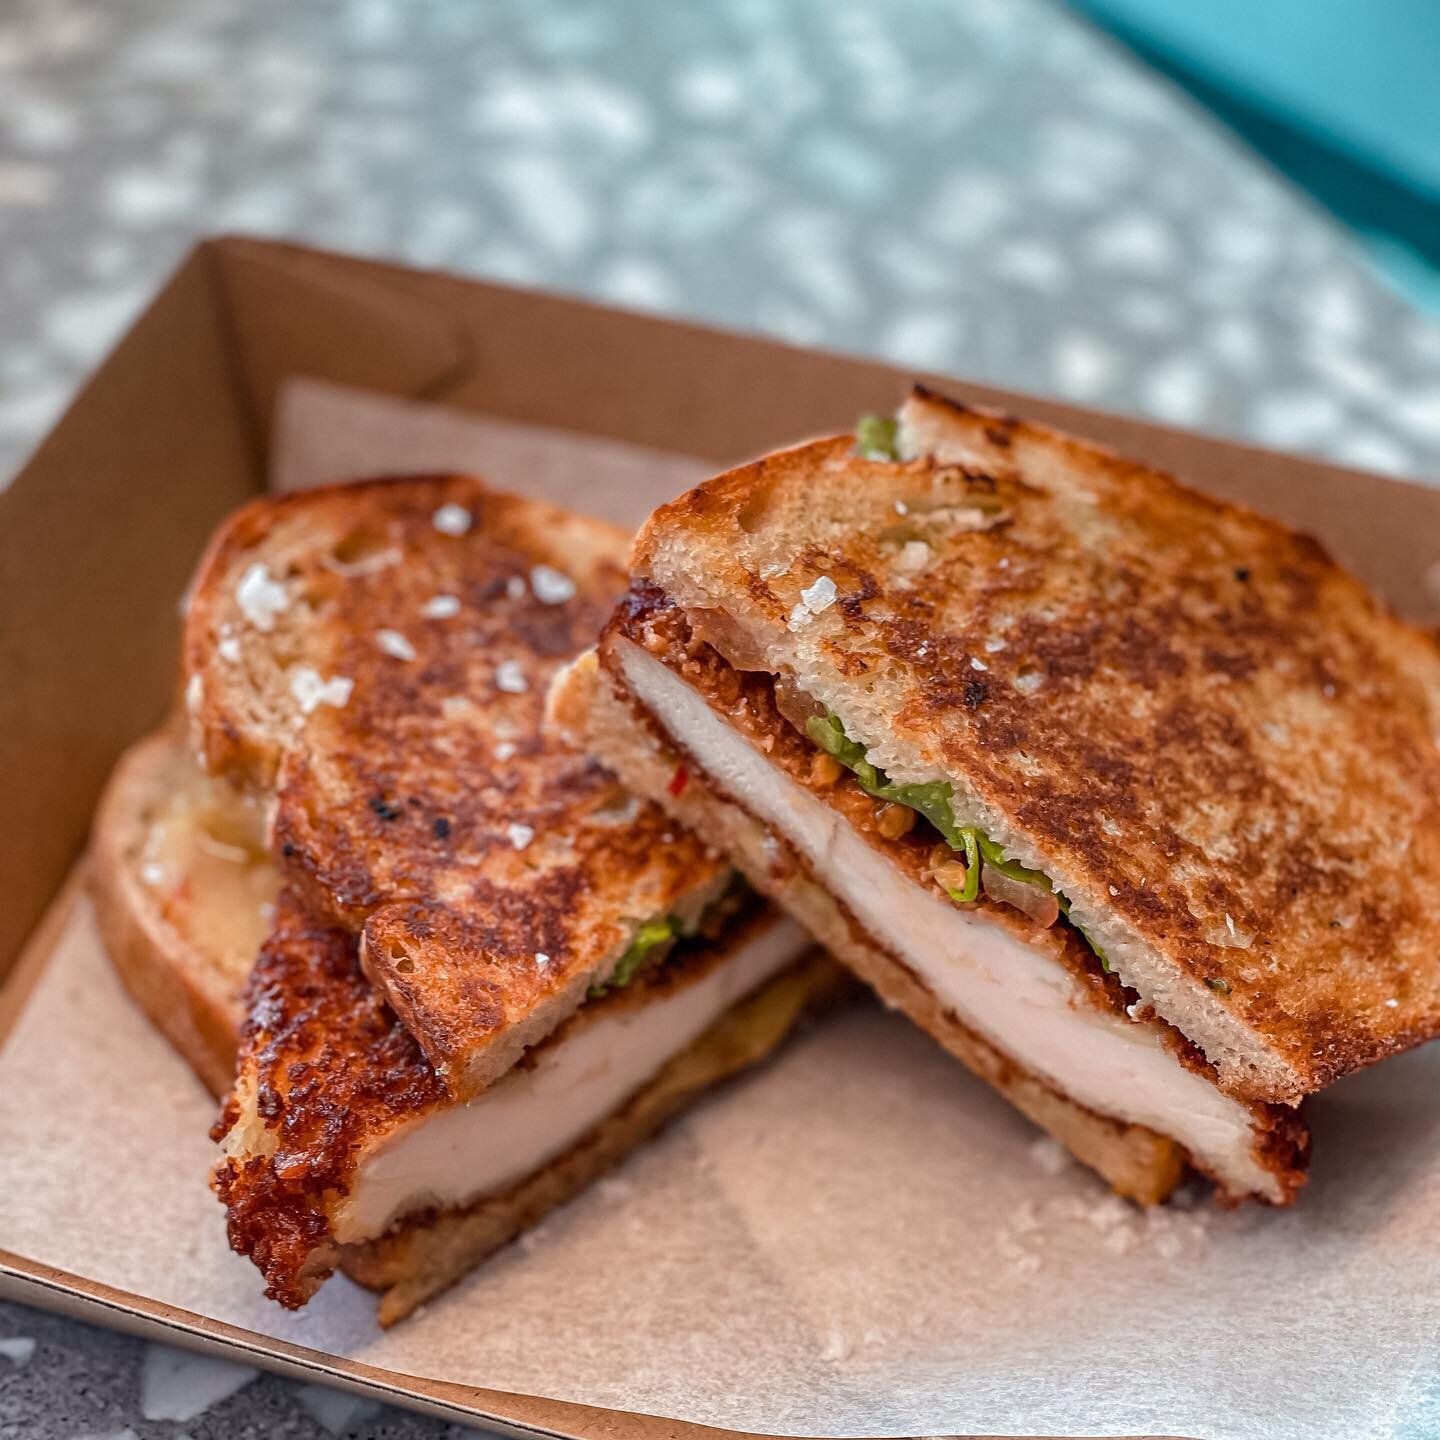 Keen for a delicious lunch today? you can&rsquo;t go wrong with our delicious gourmet toasties😍 Yours until 2pm 📍 27 Baines Cres, Torquay

#gourmettoasties #cafegourmet #lunchtime 
  #torquaylife #torquay #surfcoastshire #surfcoastlife #surfcoastli